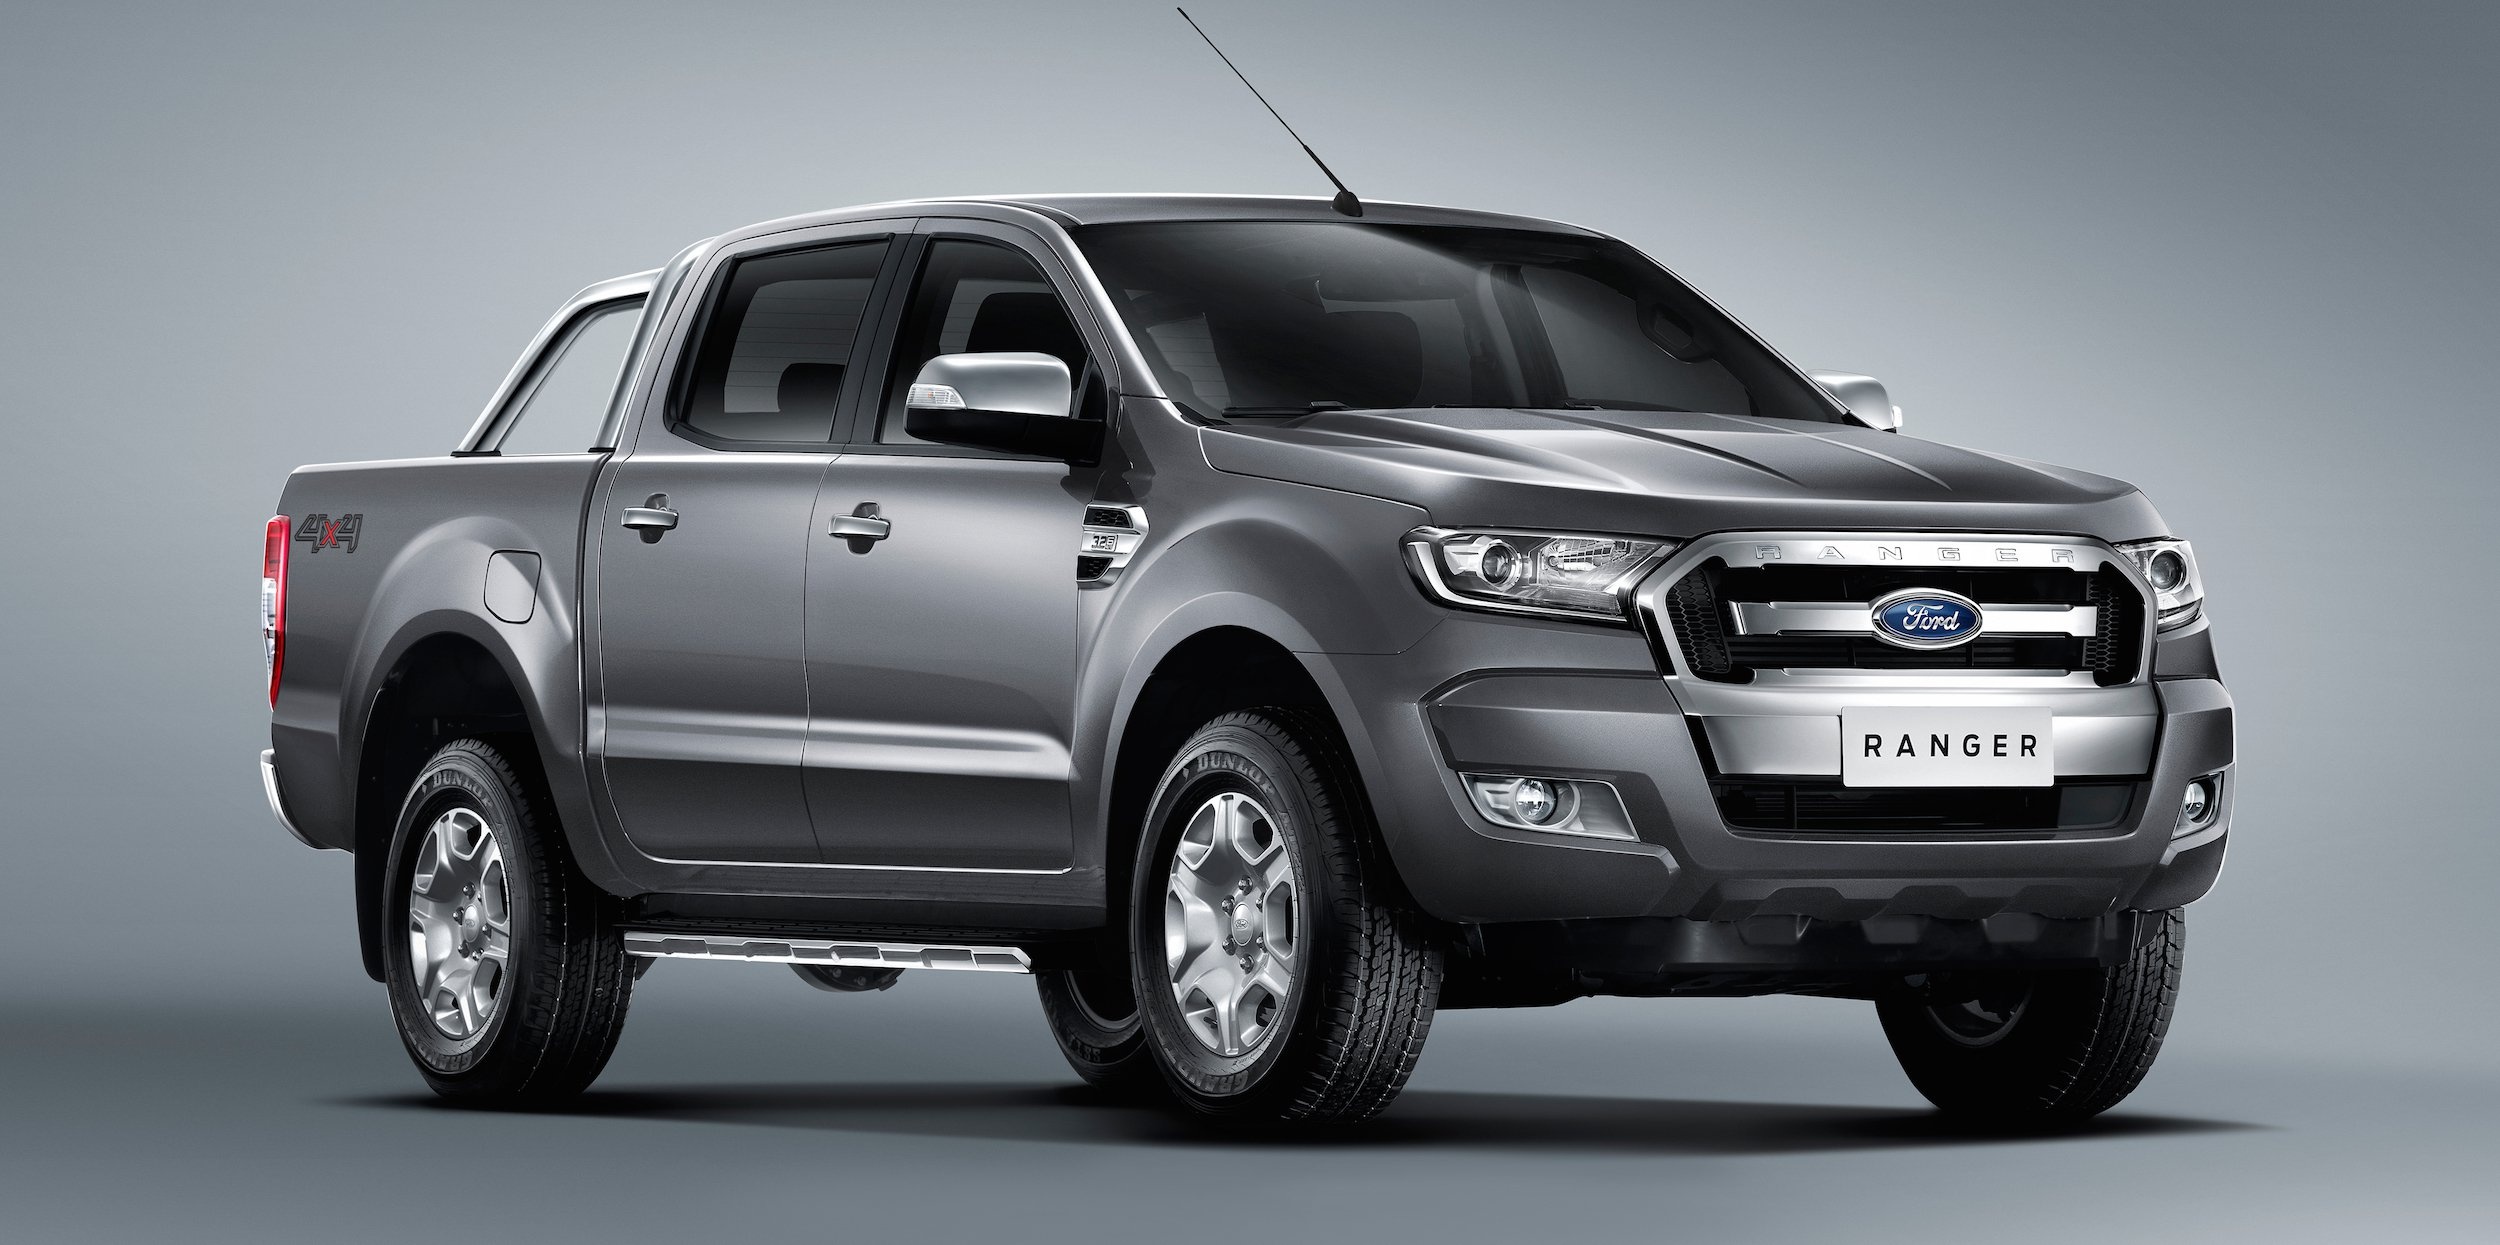 Ford Ranger: The model returned to its model range in North America for the 2019 model year. 2500x1250 Dual Screen Wallpaper.